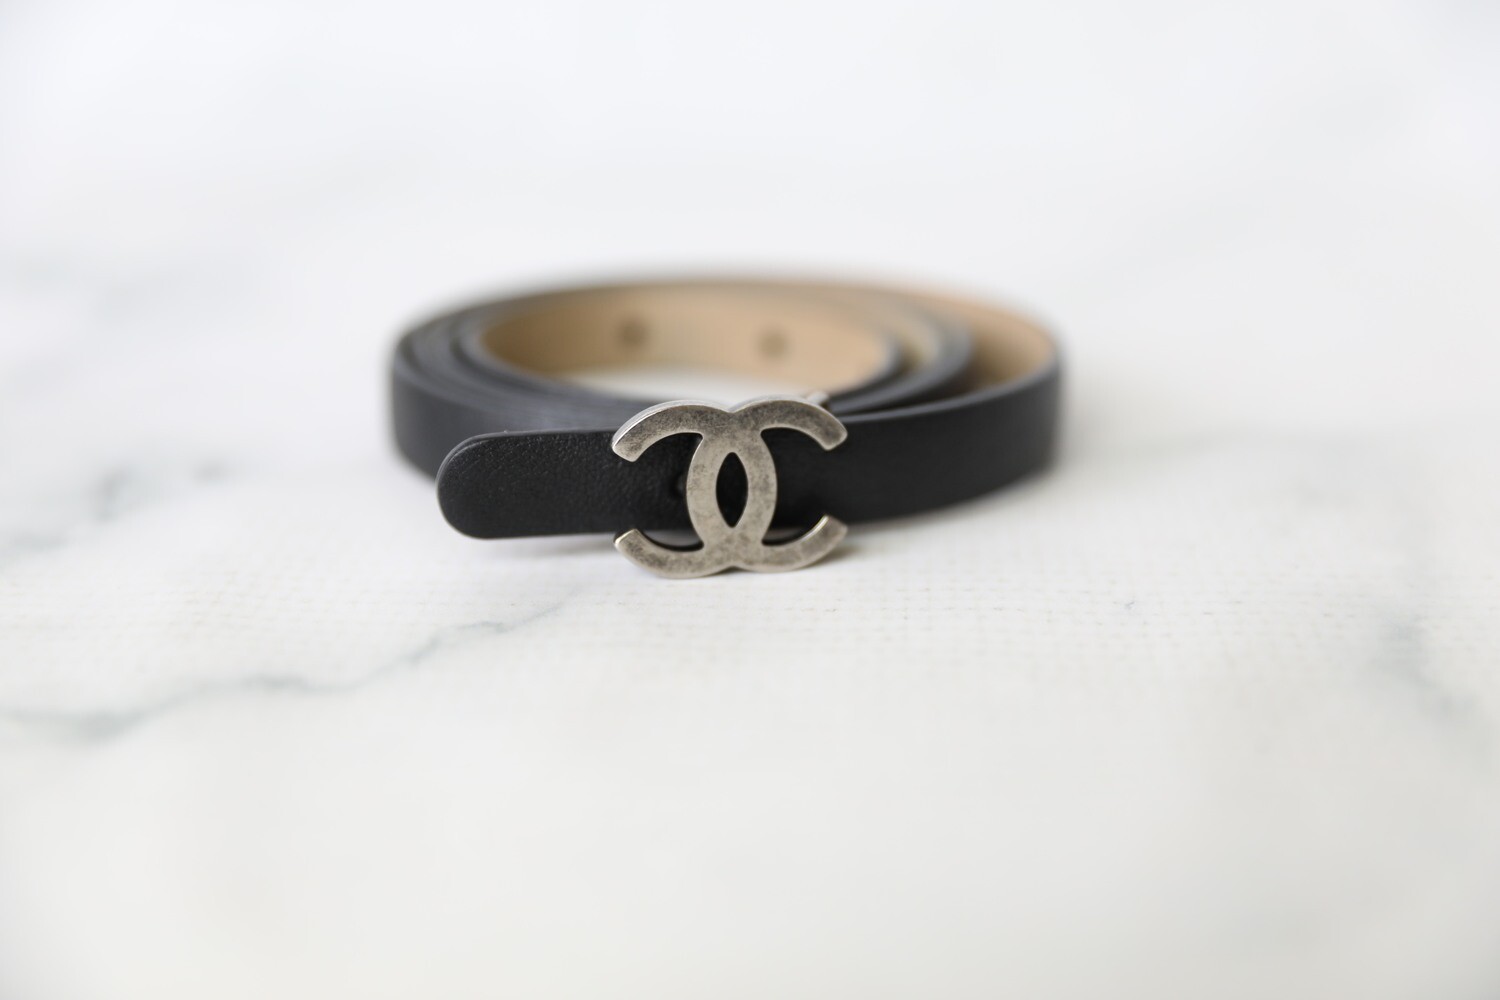 Chanel Belt Thin, Black Leather with Logo, Size 85, Preowned in Box WA001